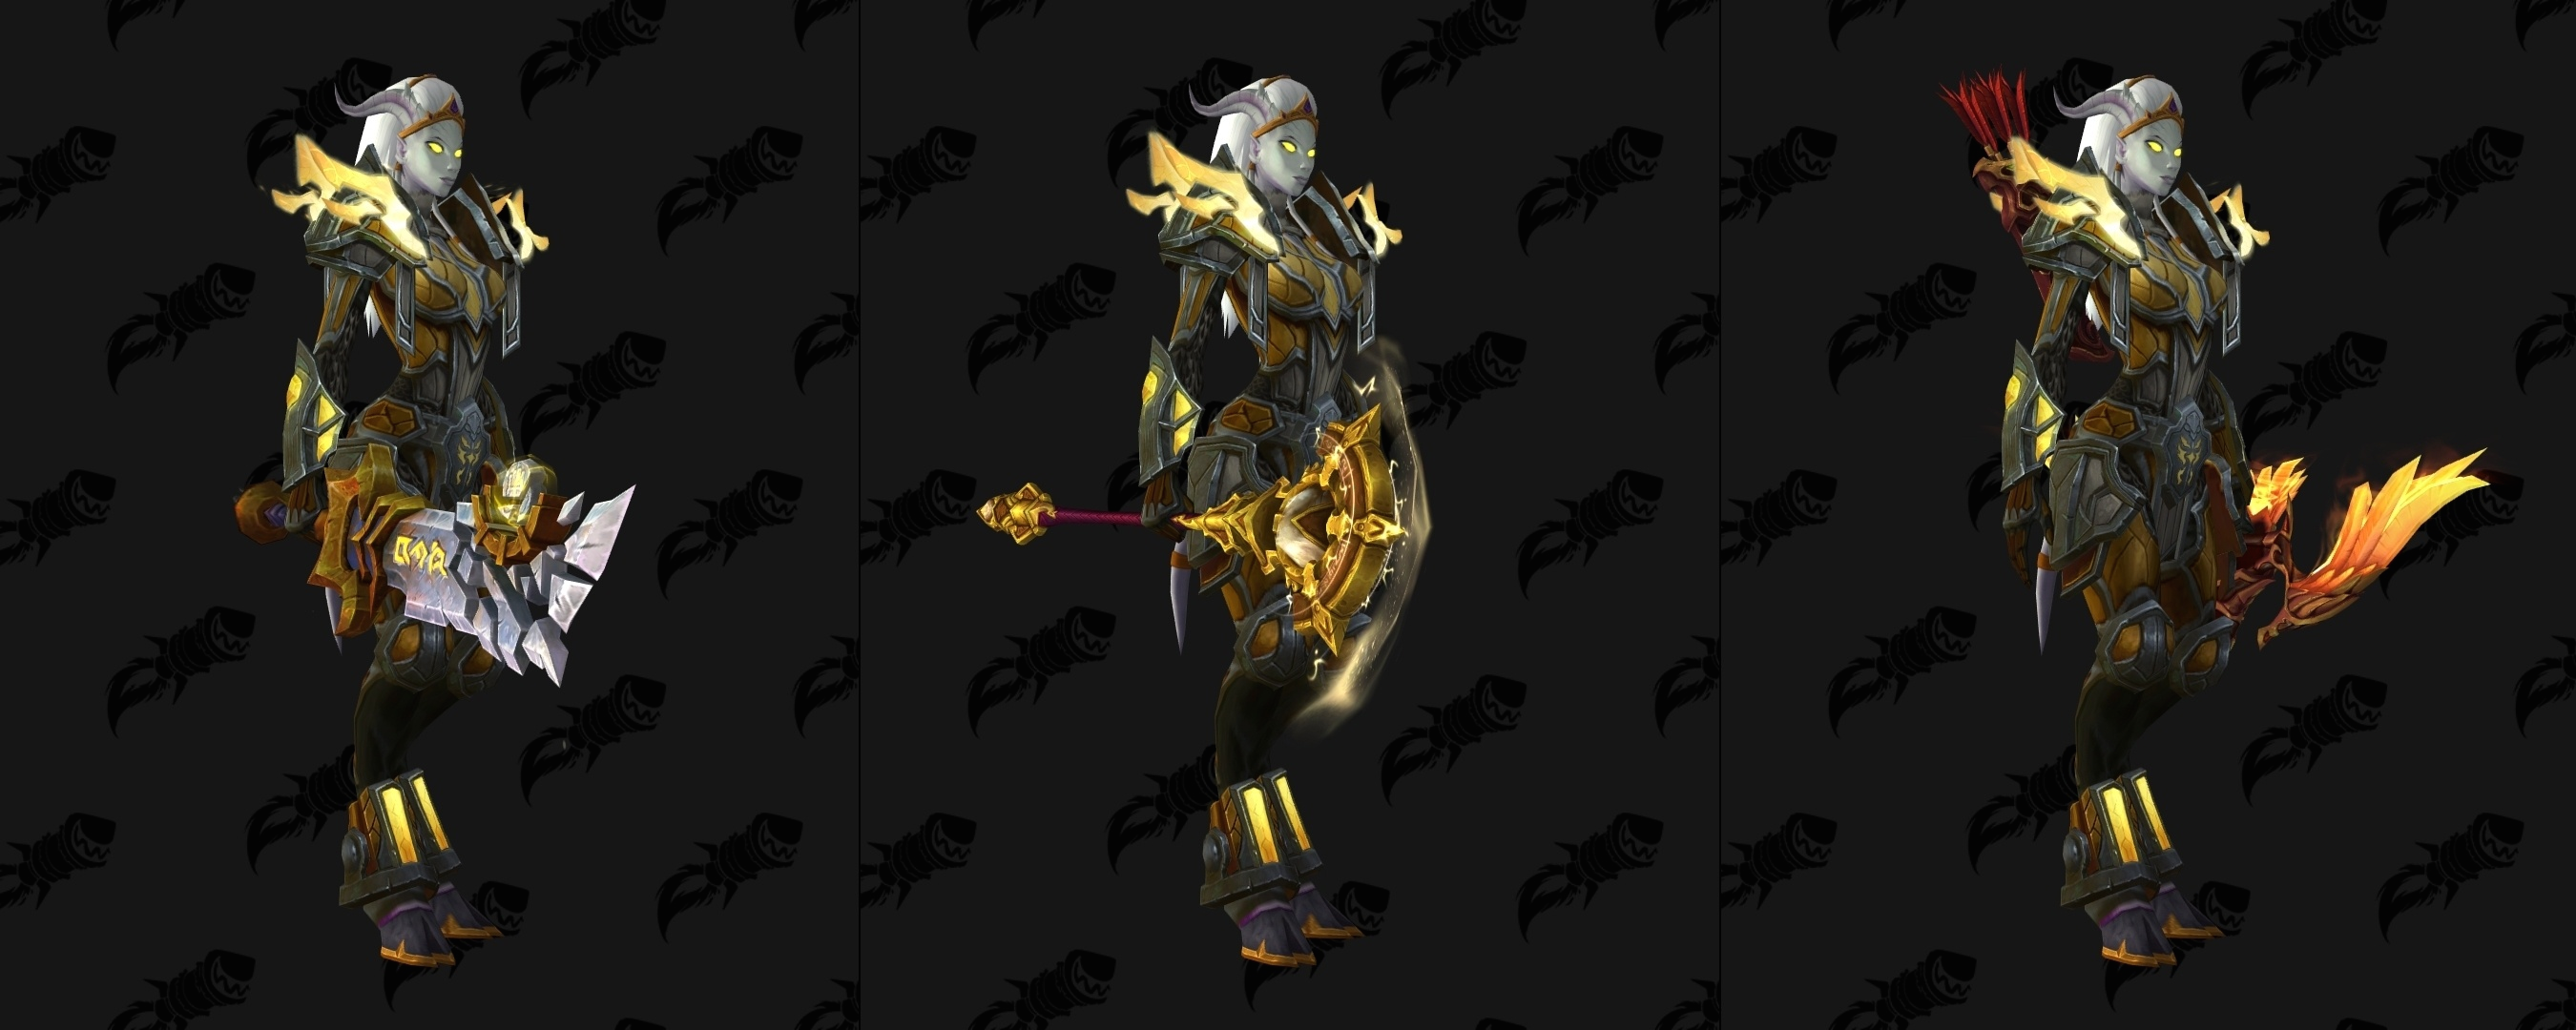 suggestions for the Lightforged Draenei Allied Race, including matching wea...